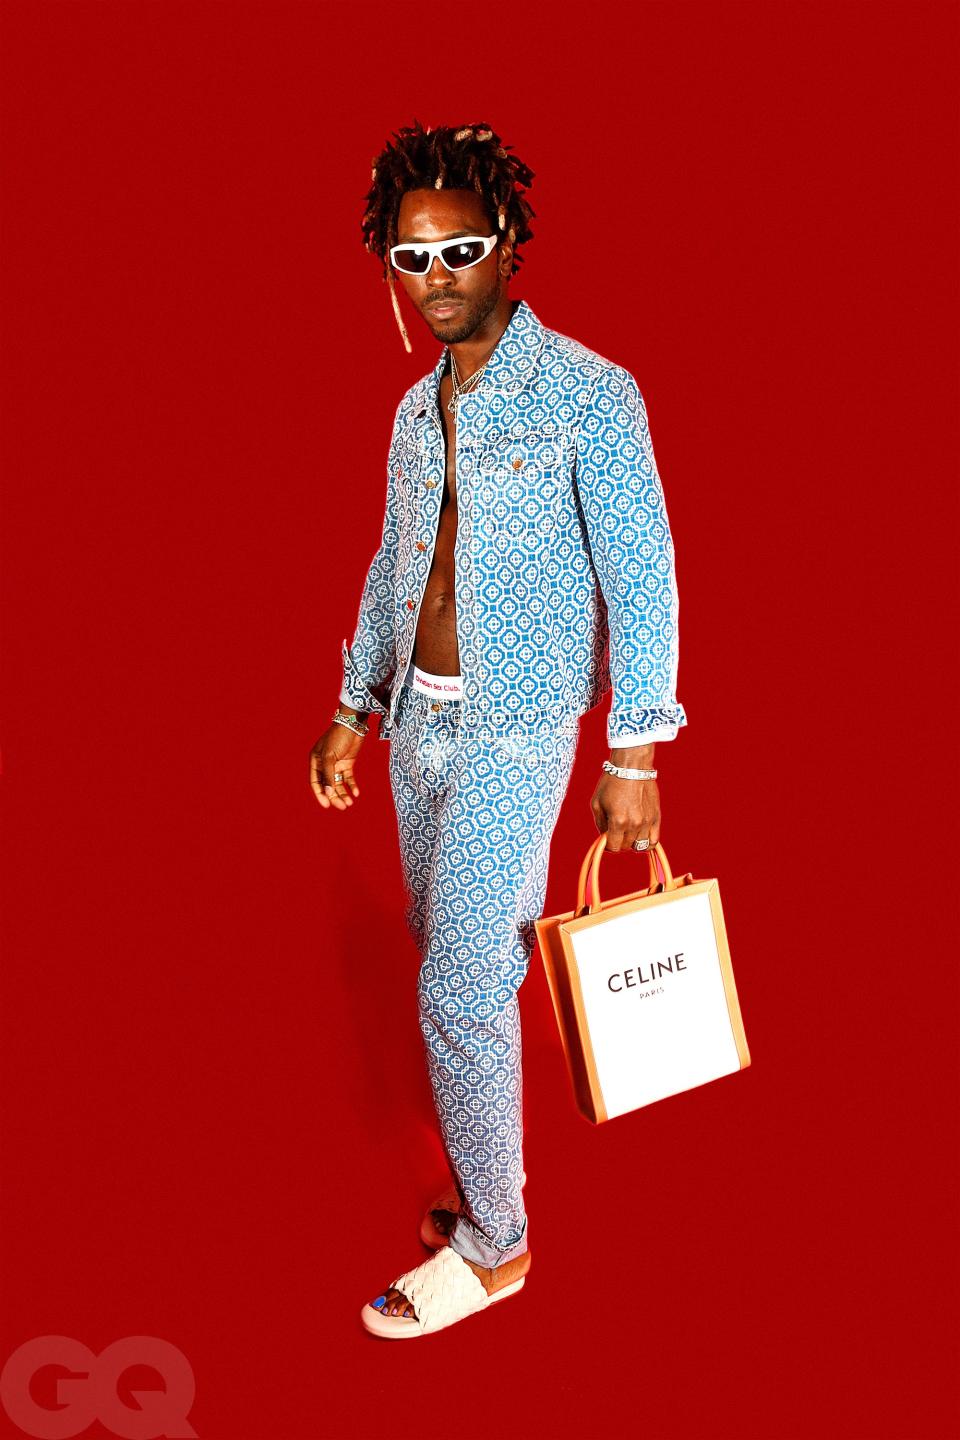 <cite class="credit">Jacket, and jeans (throughout), by Casablanca / Underwear (throughout), by Not a Cult / Slides, and sunglasses, by Bottega Veneta / Bag, by Celine by Hedi Slimane / Gold bracelet (right arm, throughout), by Van Cleef & Arpels / Silver bracelet (right arm, throughout), by Gucci / Link bracelet (right arm, throughout), by ByChari</cite>